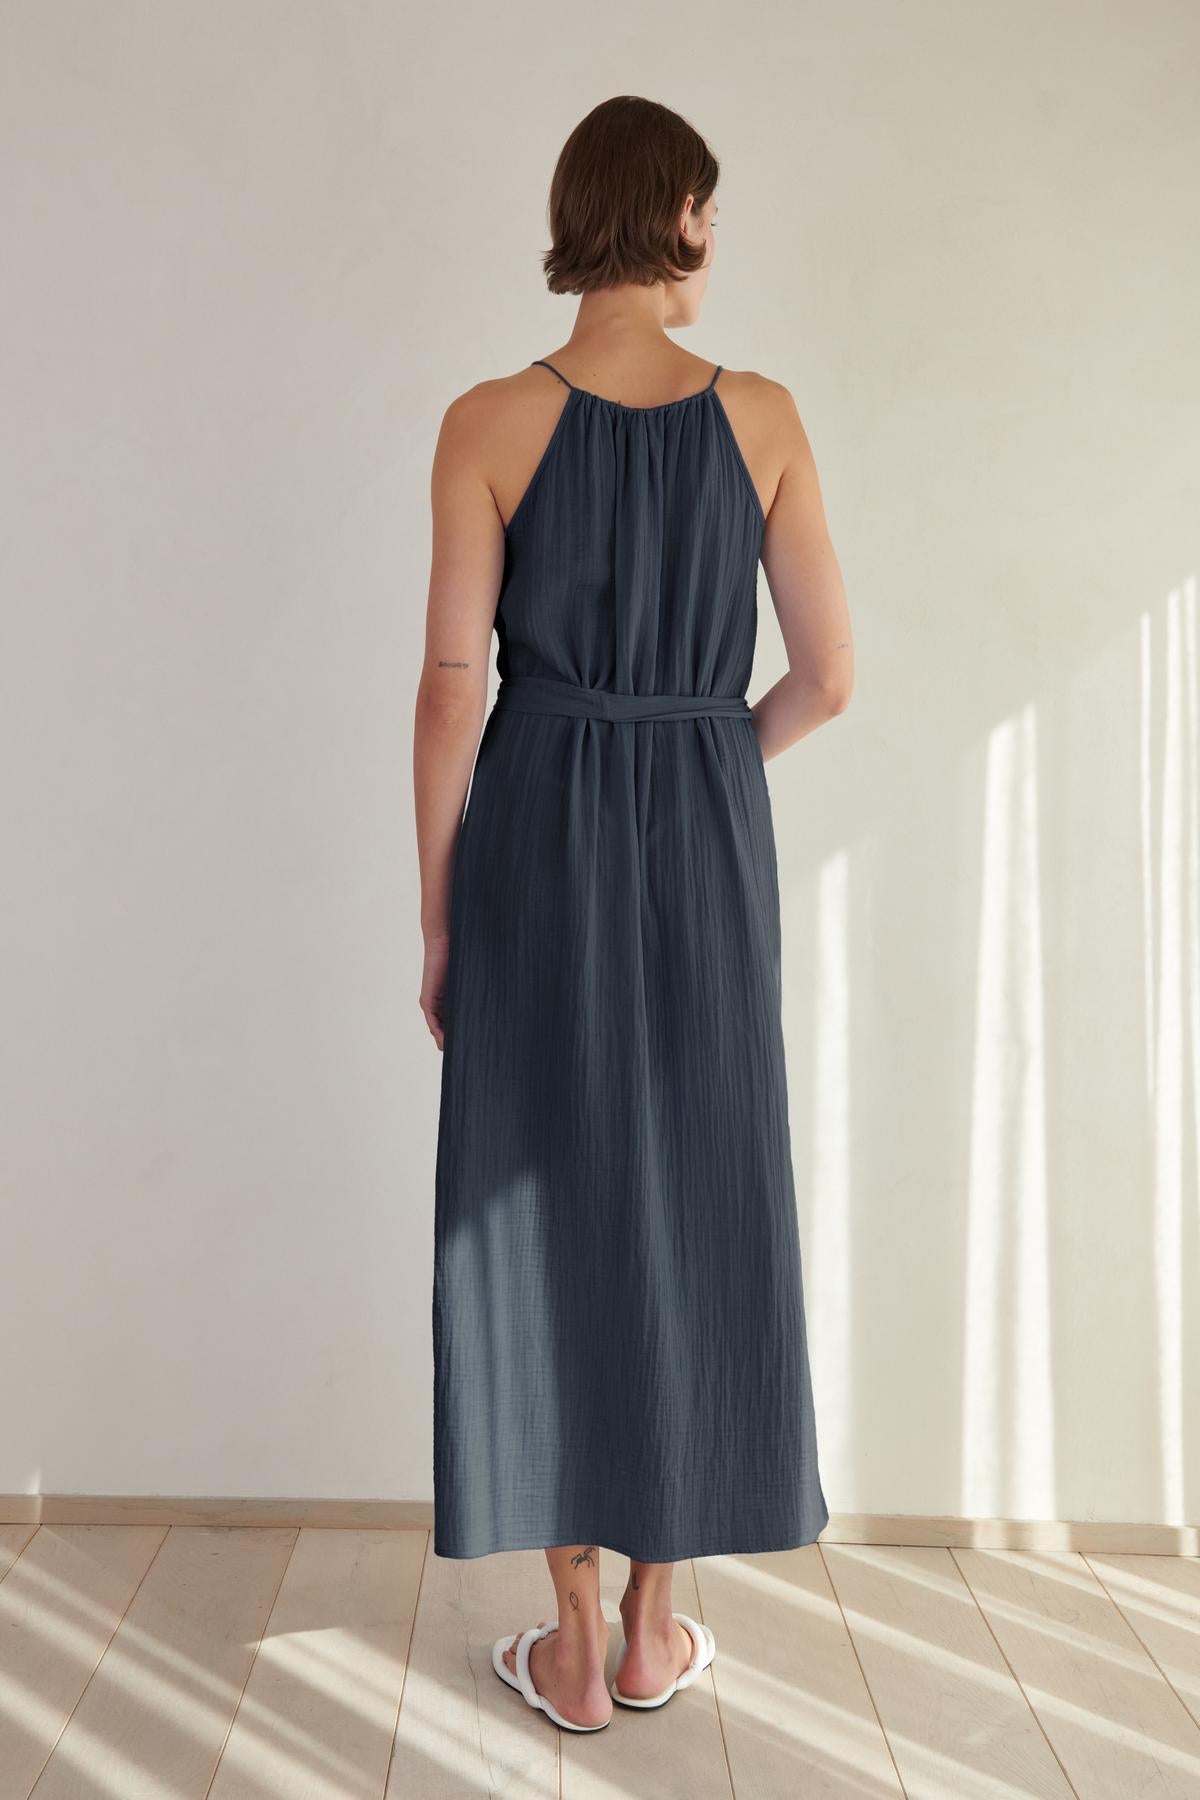 A woman stands facing away from the camera in a sunlit room, wearing a navy maxi Carrillo dress by Velvet by Jenny Graham with a halter neck and white sandals.-26293220049089